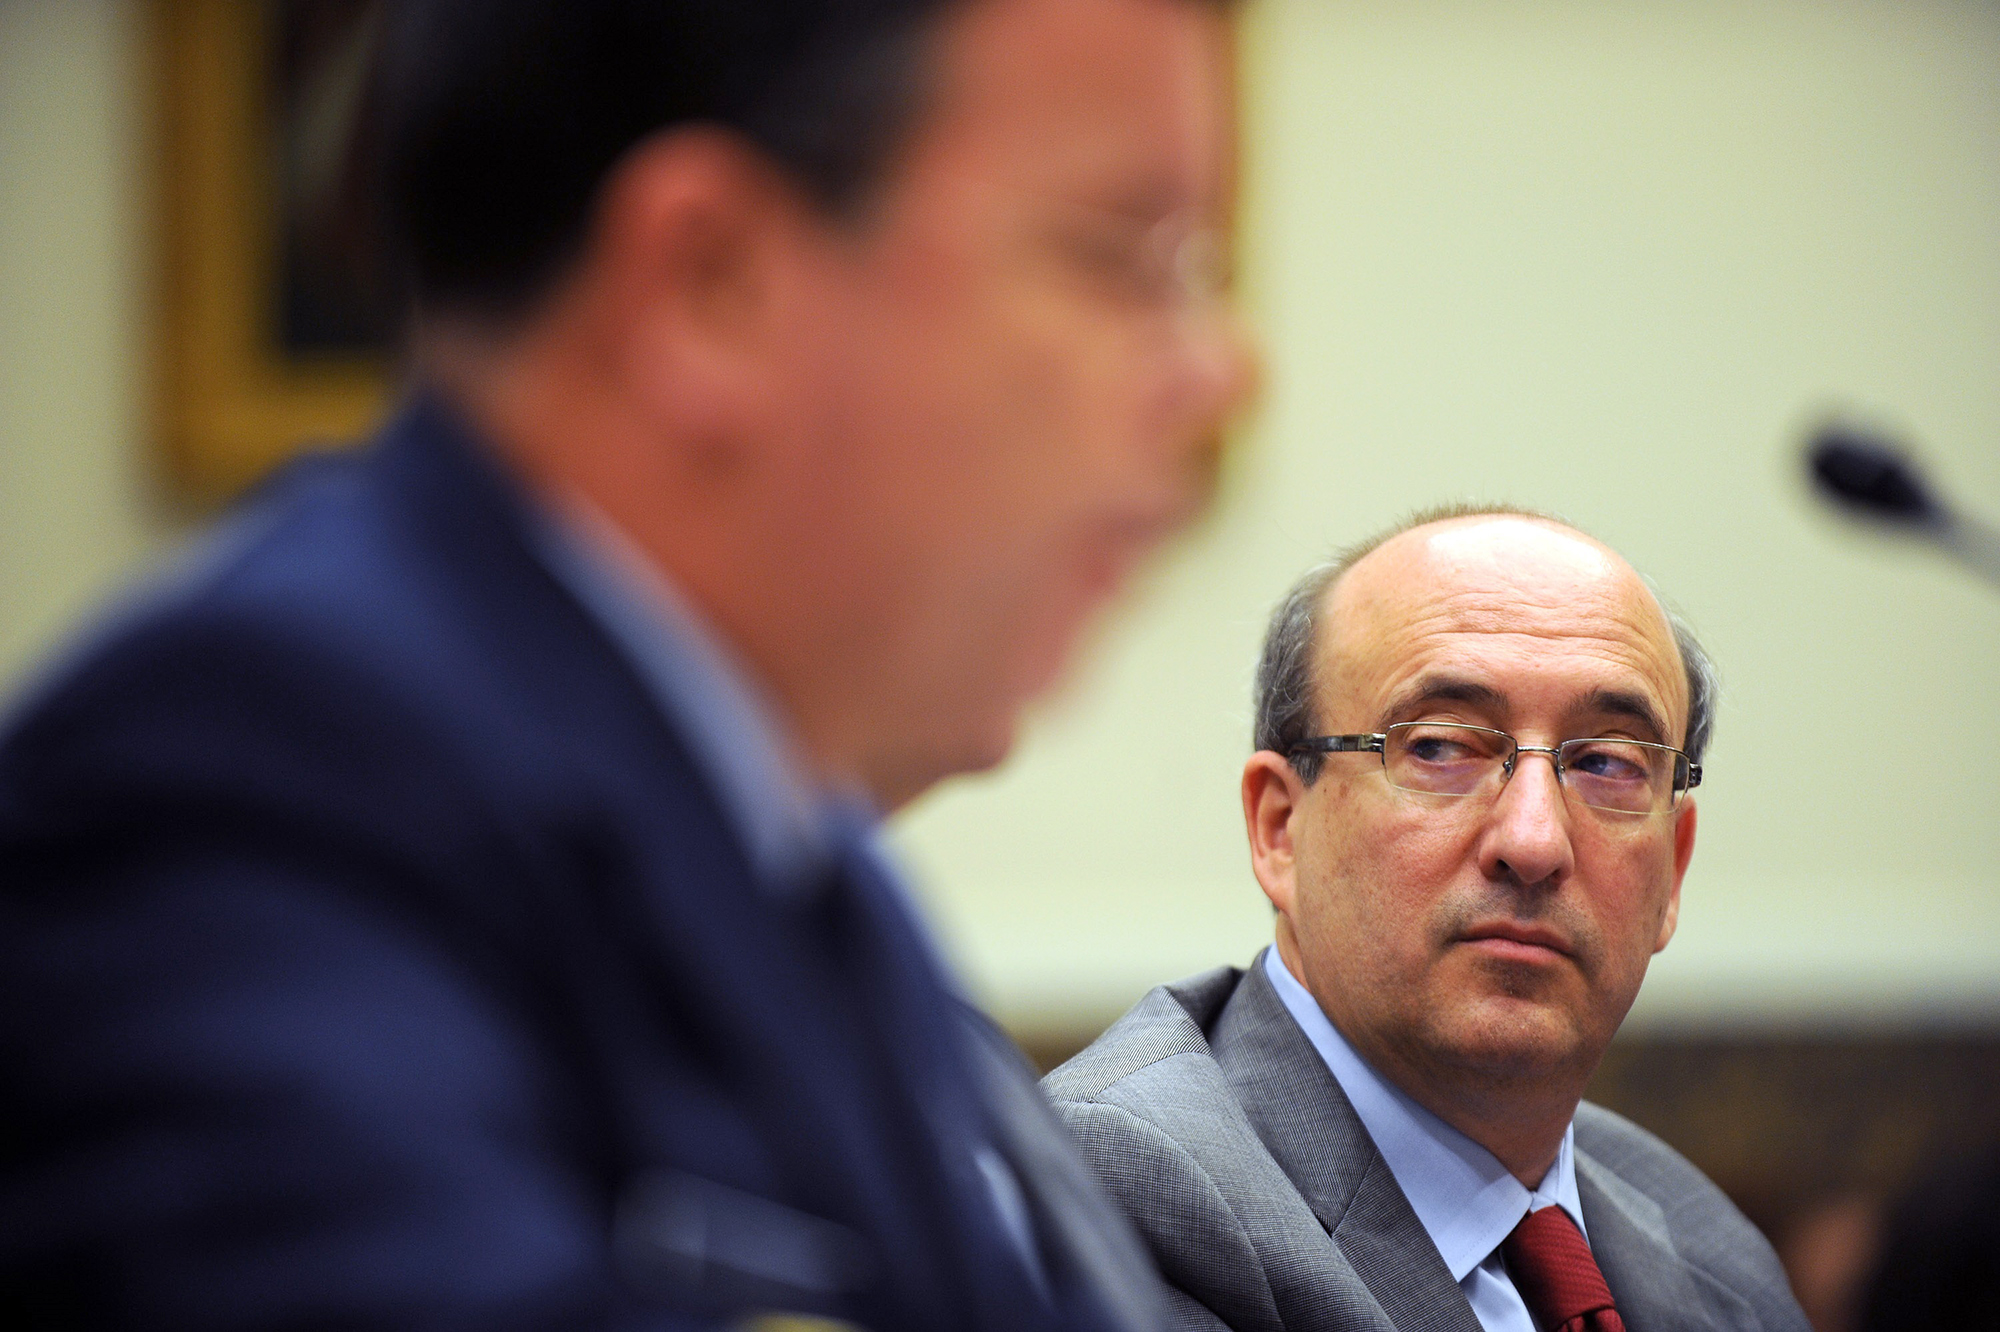 PHOTO: Assistant Labor Secretary David Michaels  of the Occupational Safety and Health Administration attends a full committee hearing on Capitol Hill, June 23, 2010.